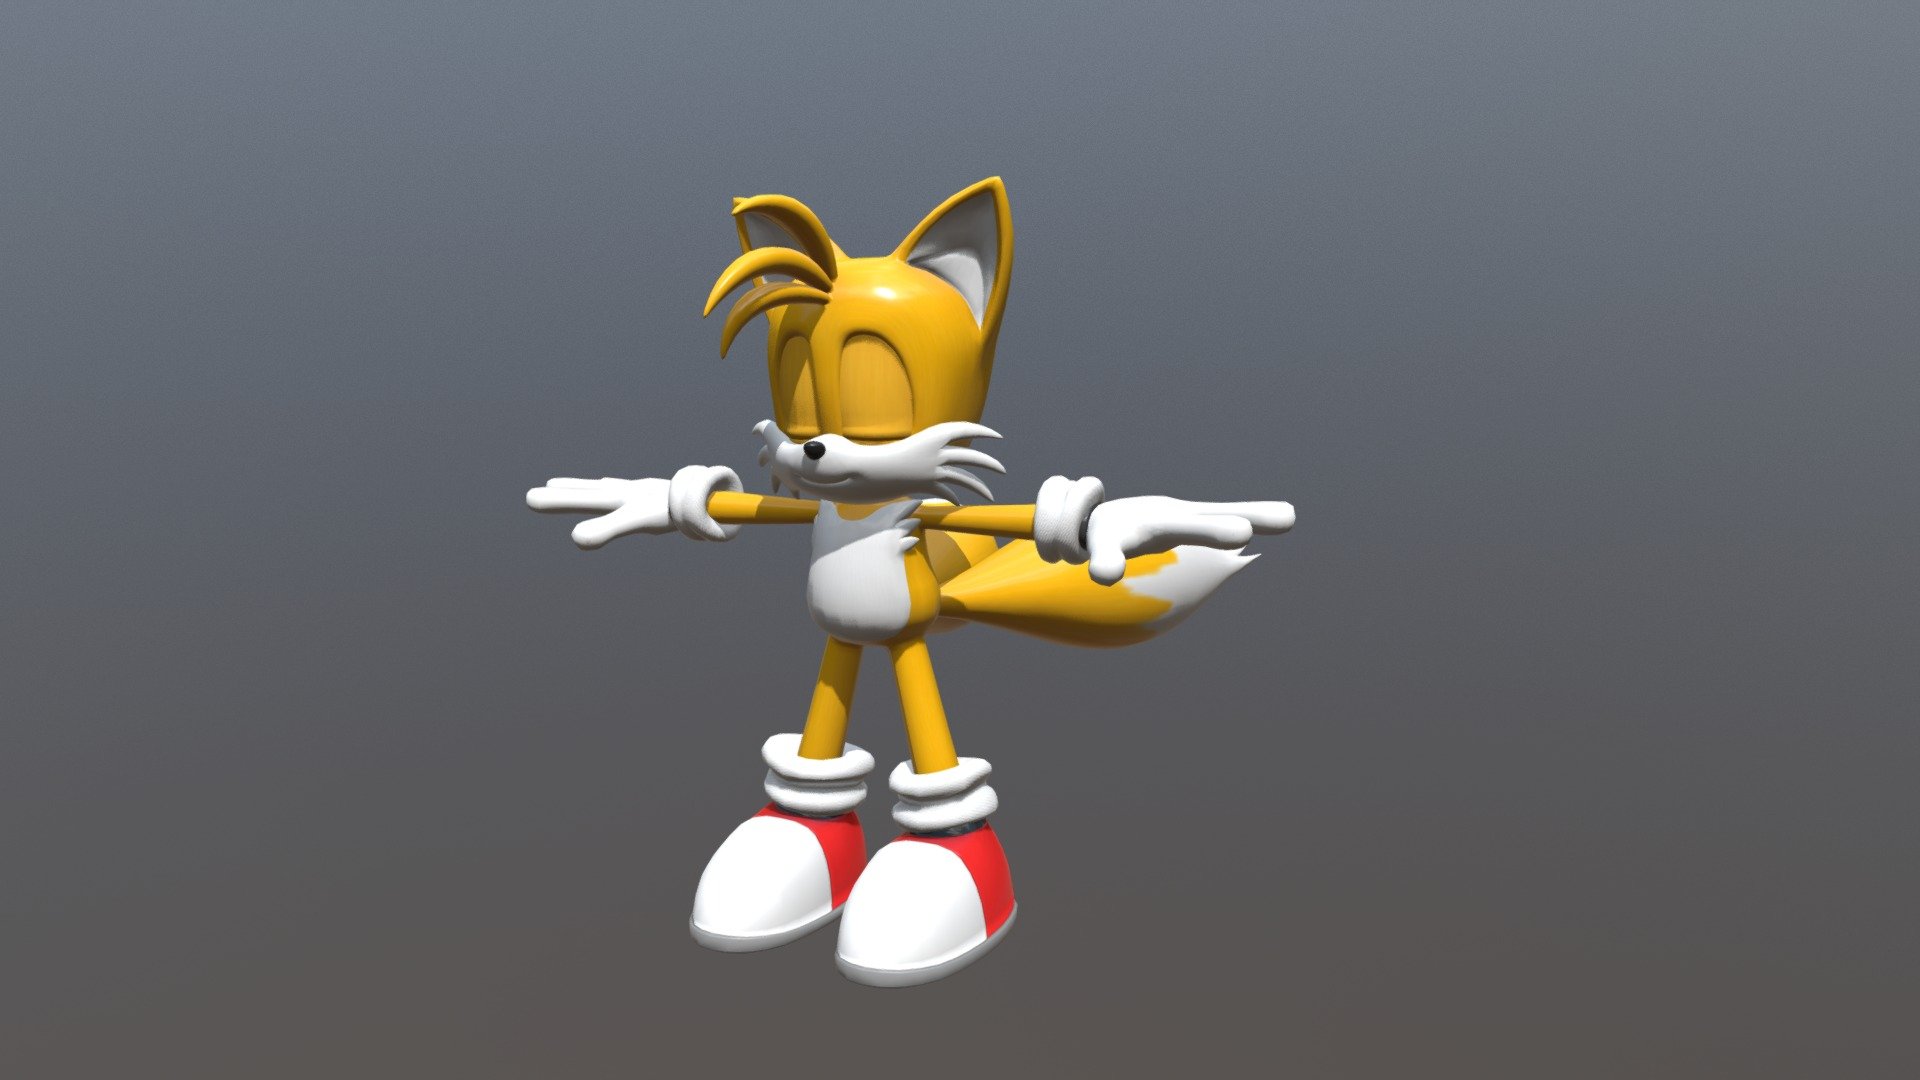 Might as well continue doing the other models. Next up, I'm gonna do either Modern Sonic, Knuckles or Metal Sonic 3d model